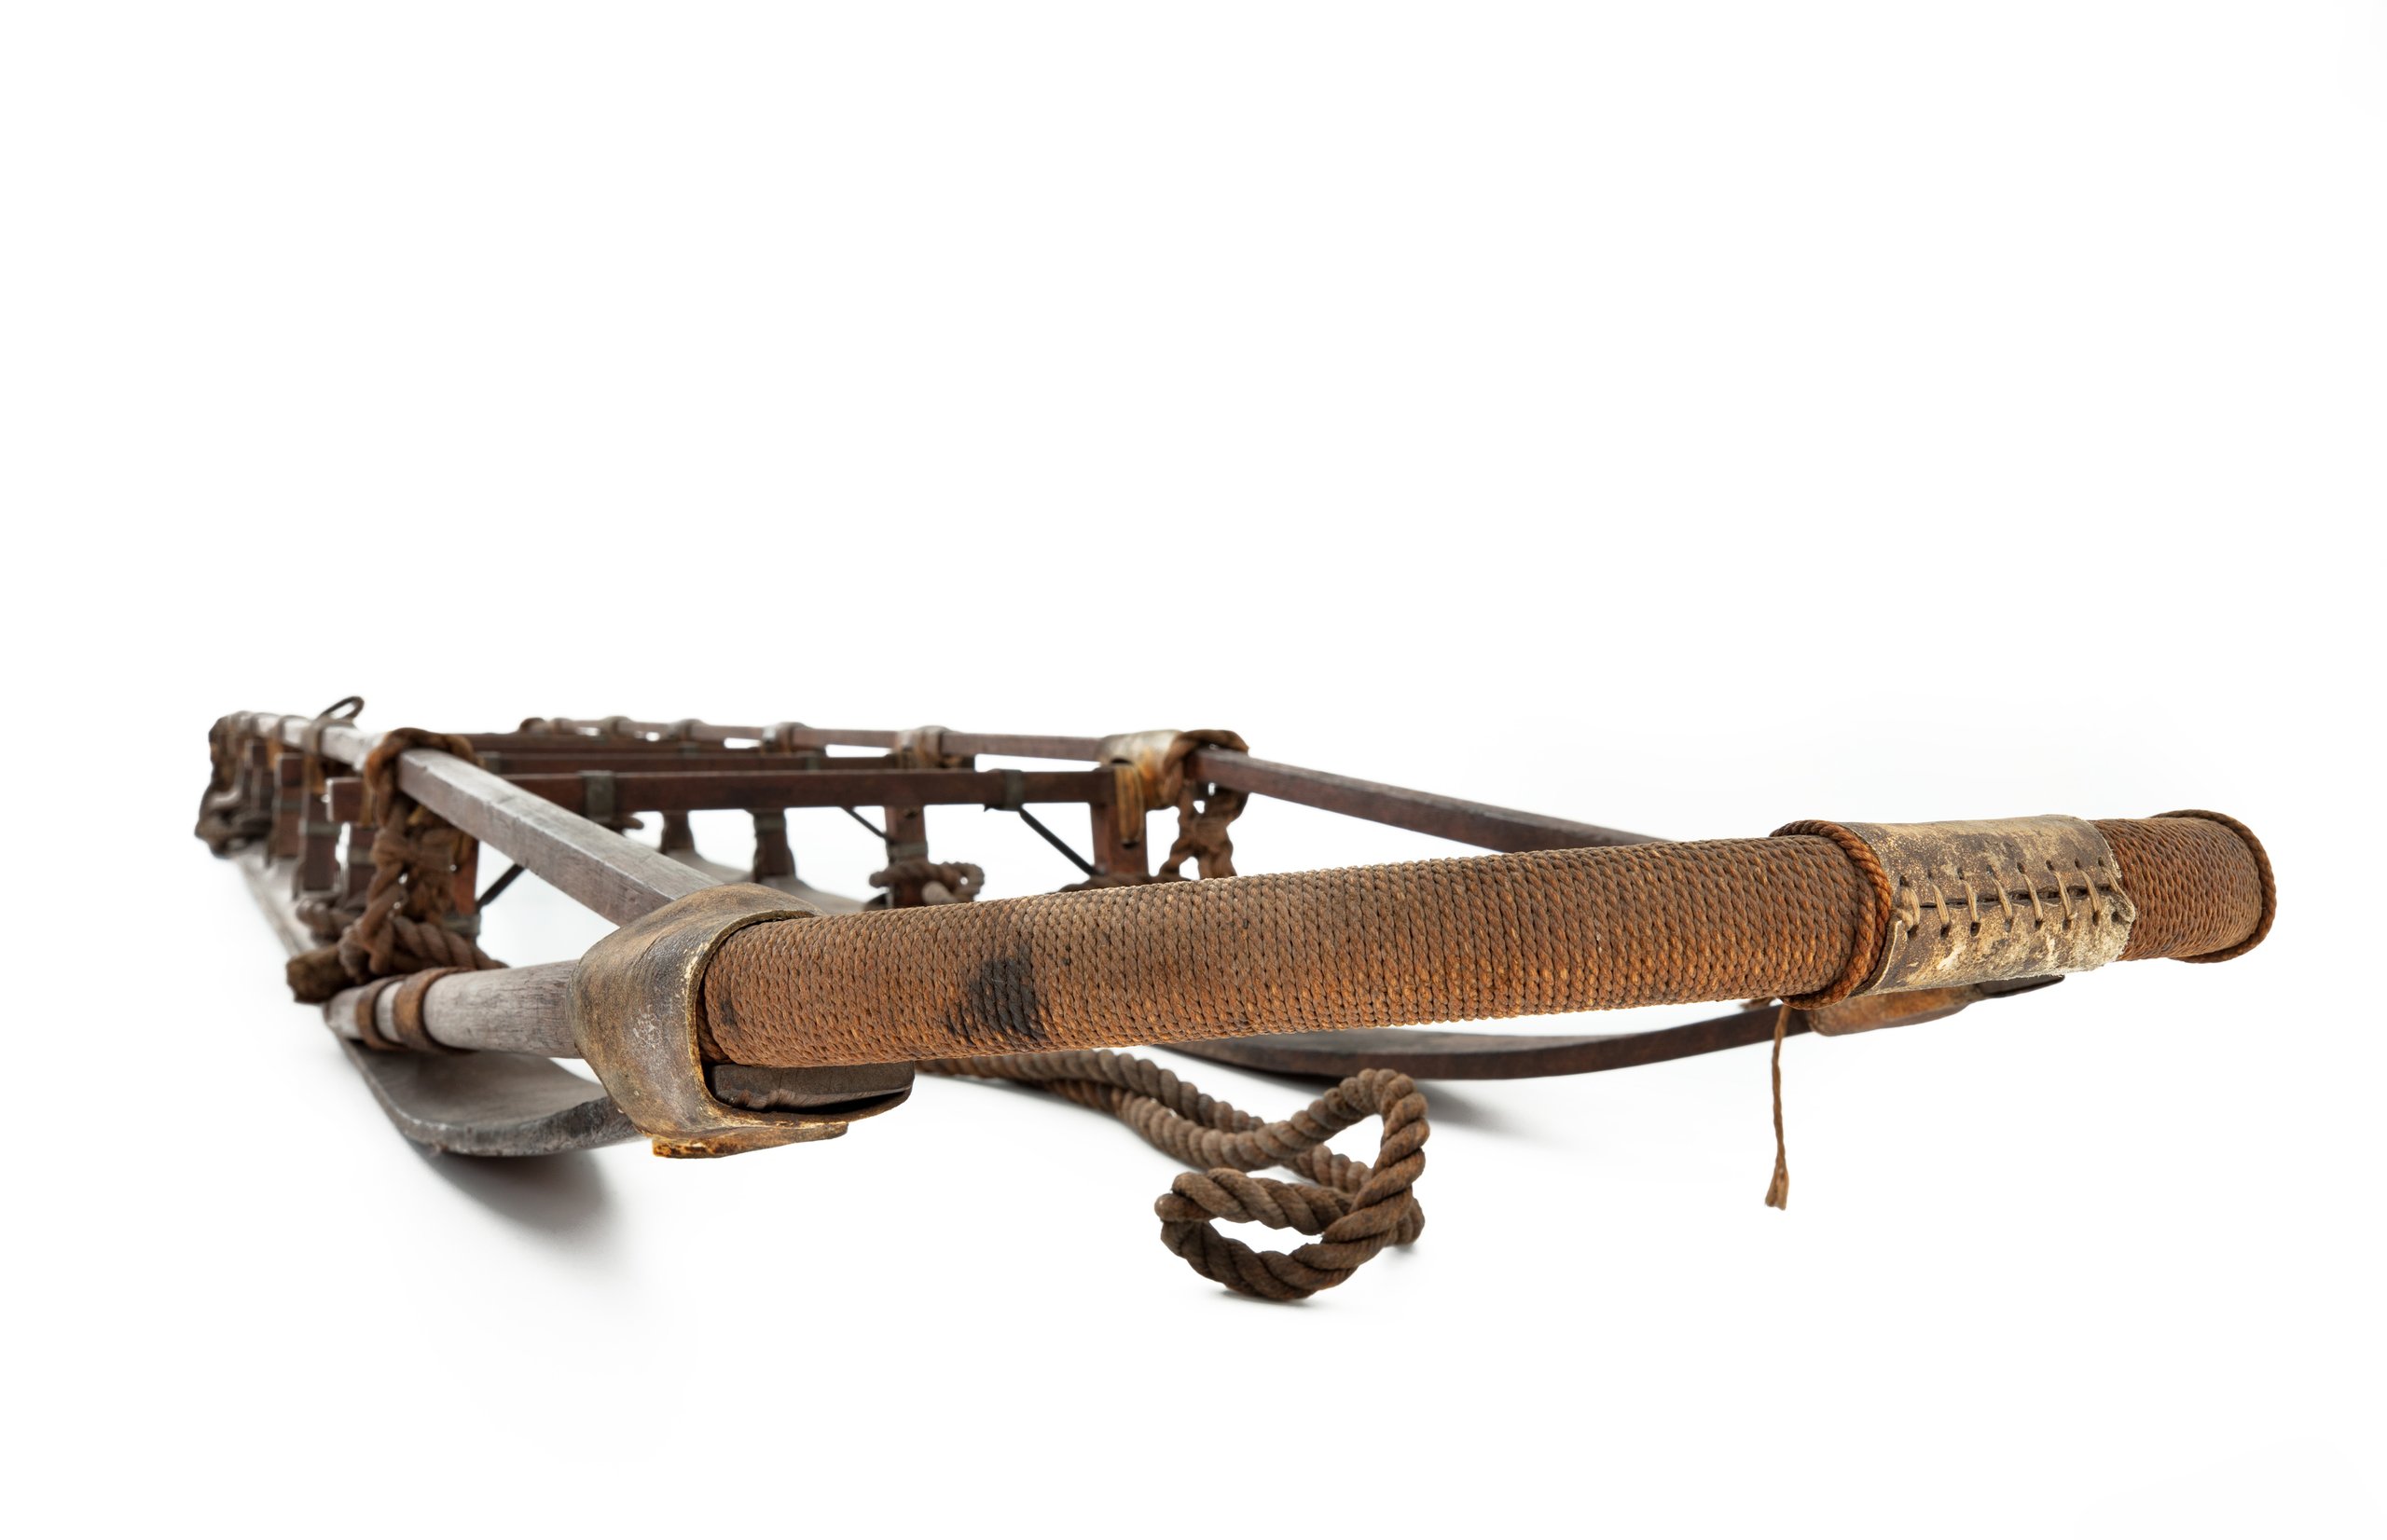 Antarctic sledge used by Sir Douglas Mawson on the Australasian Antarctic Expedition